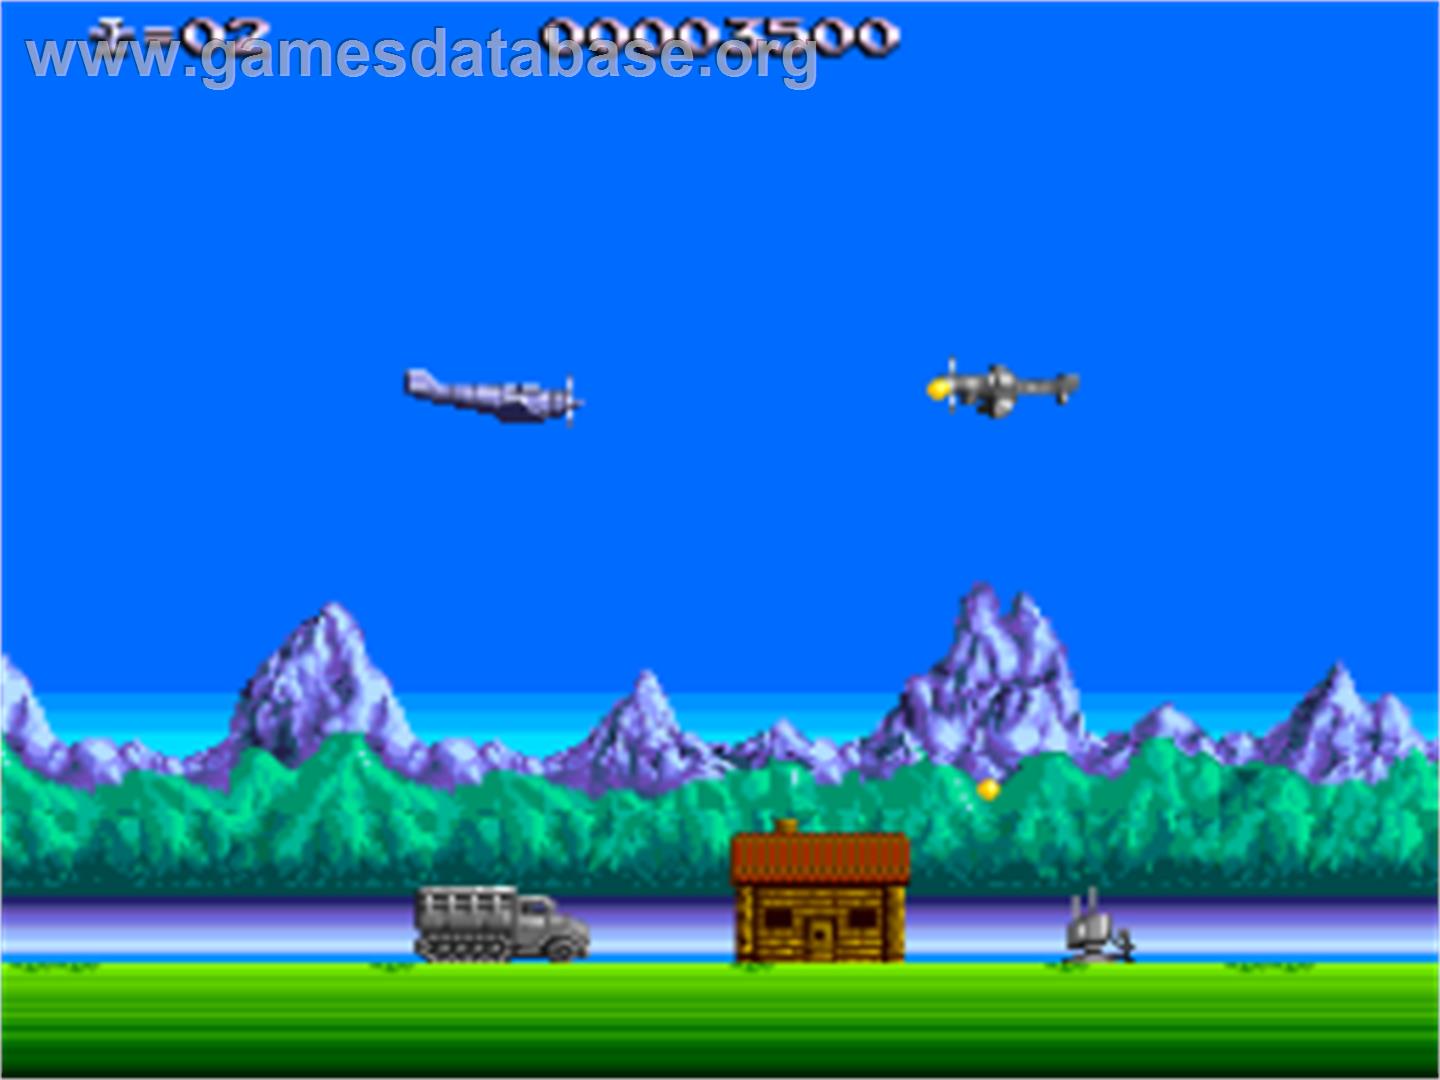 P-47 Thunderbolt: The Freedom Fighter - NEC PC Engine - Artwork - In Game